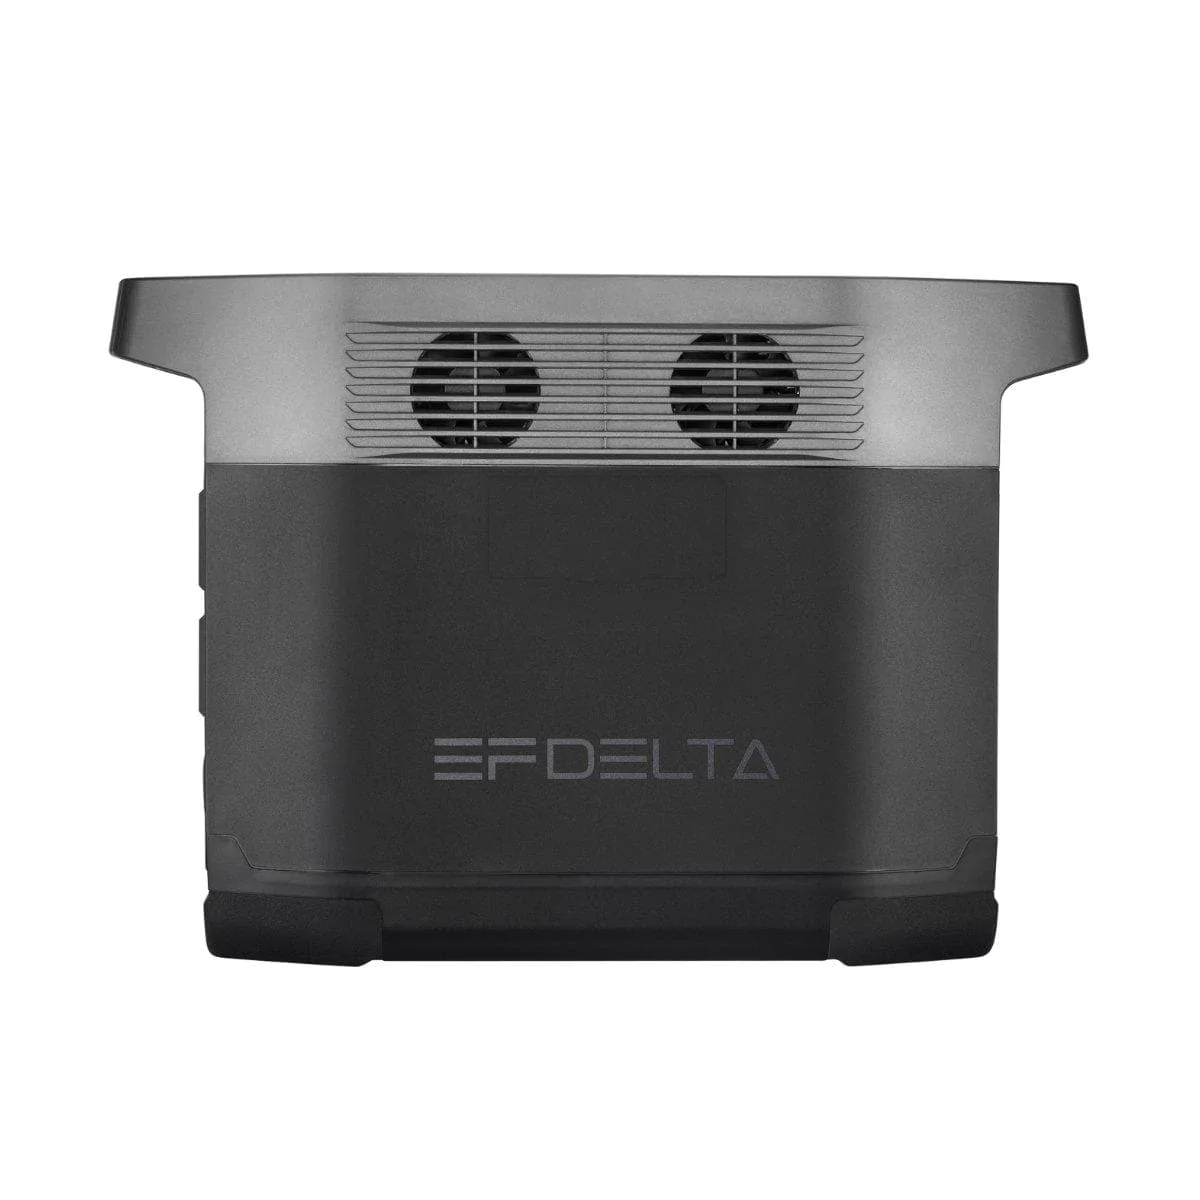 EcoFlow DELTA Portable Power Station - The Ultimate Solution for Backup Power, RV Living, and Outdoor Adventures